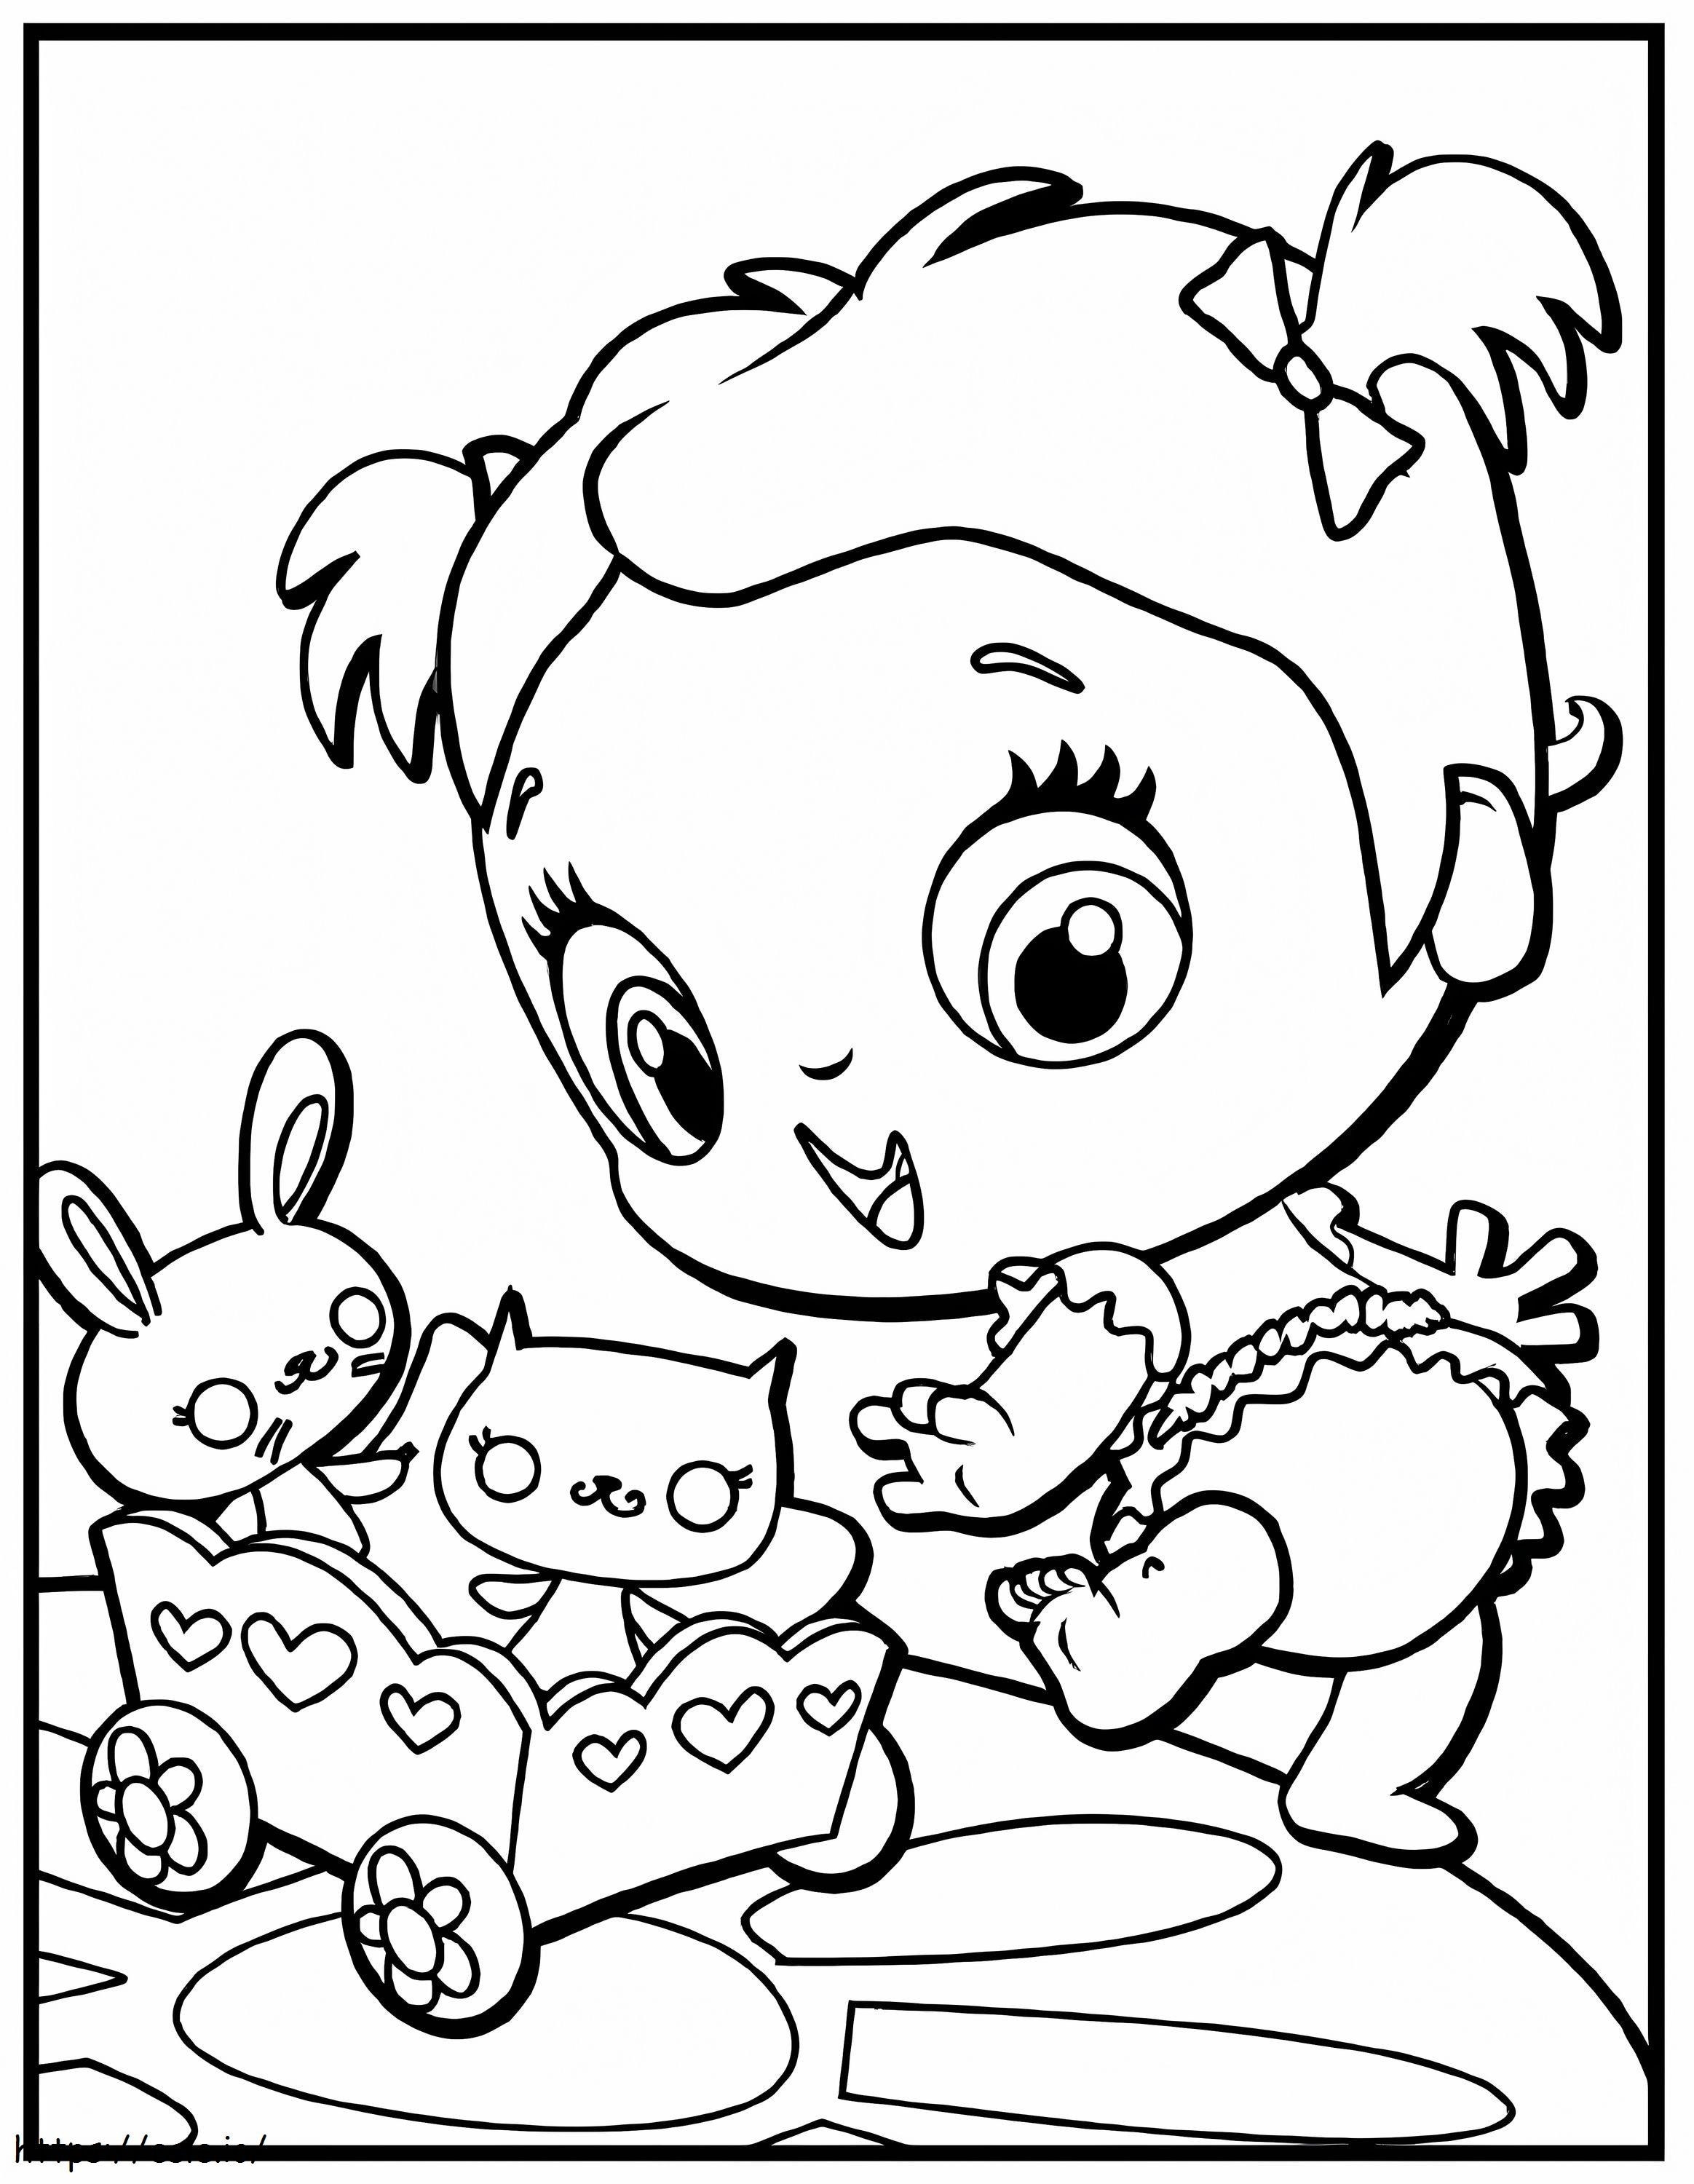 Cute Baby Alive Doll coloring page